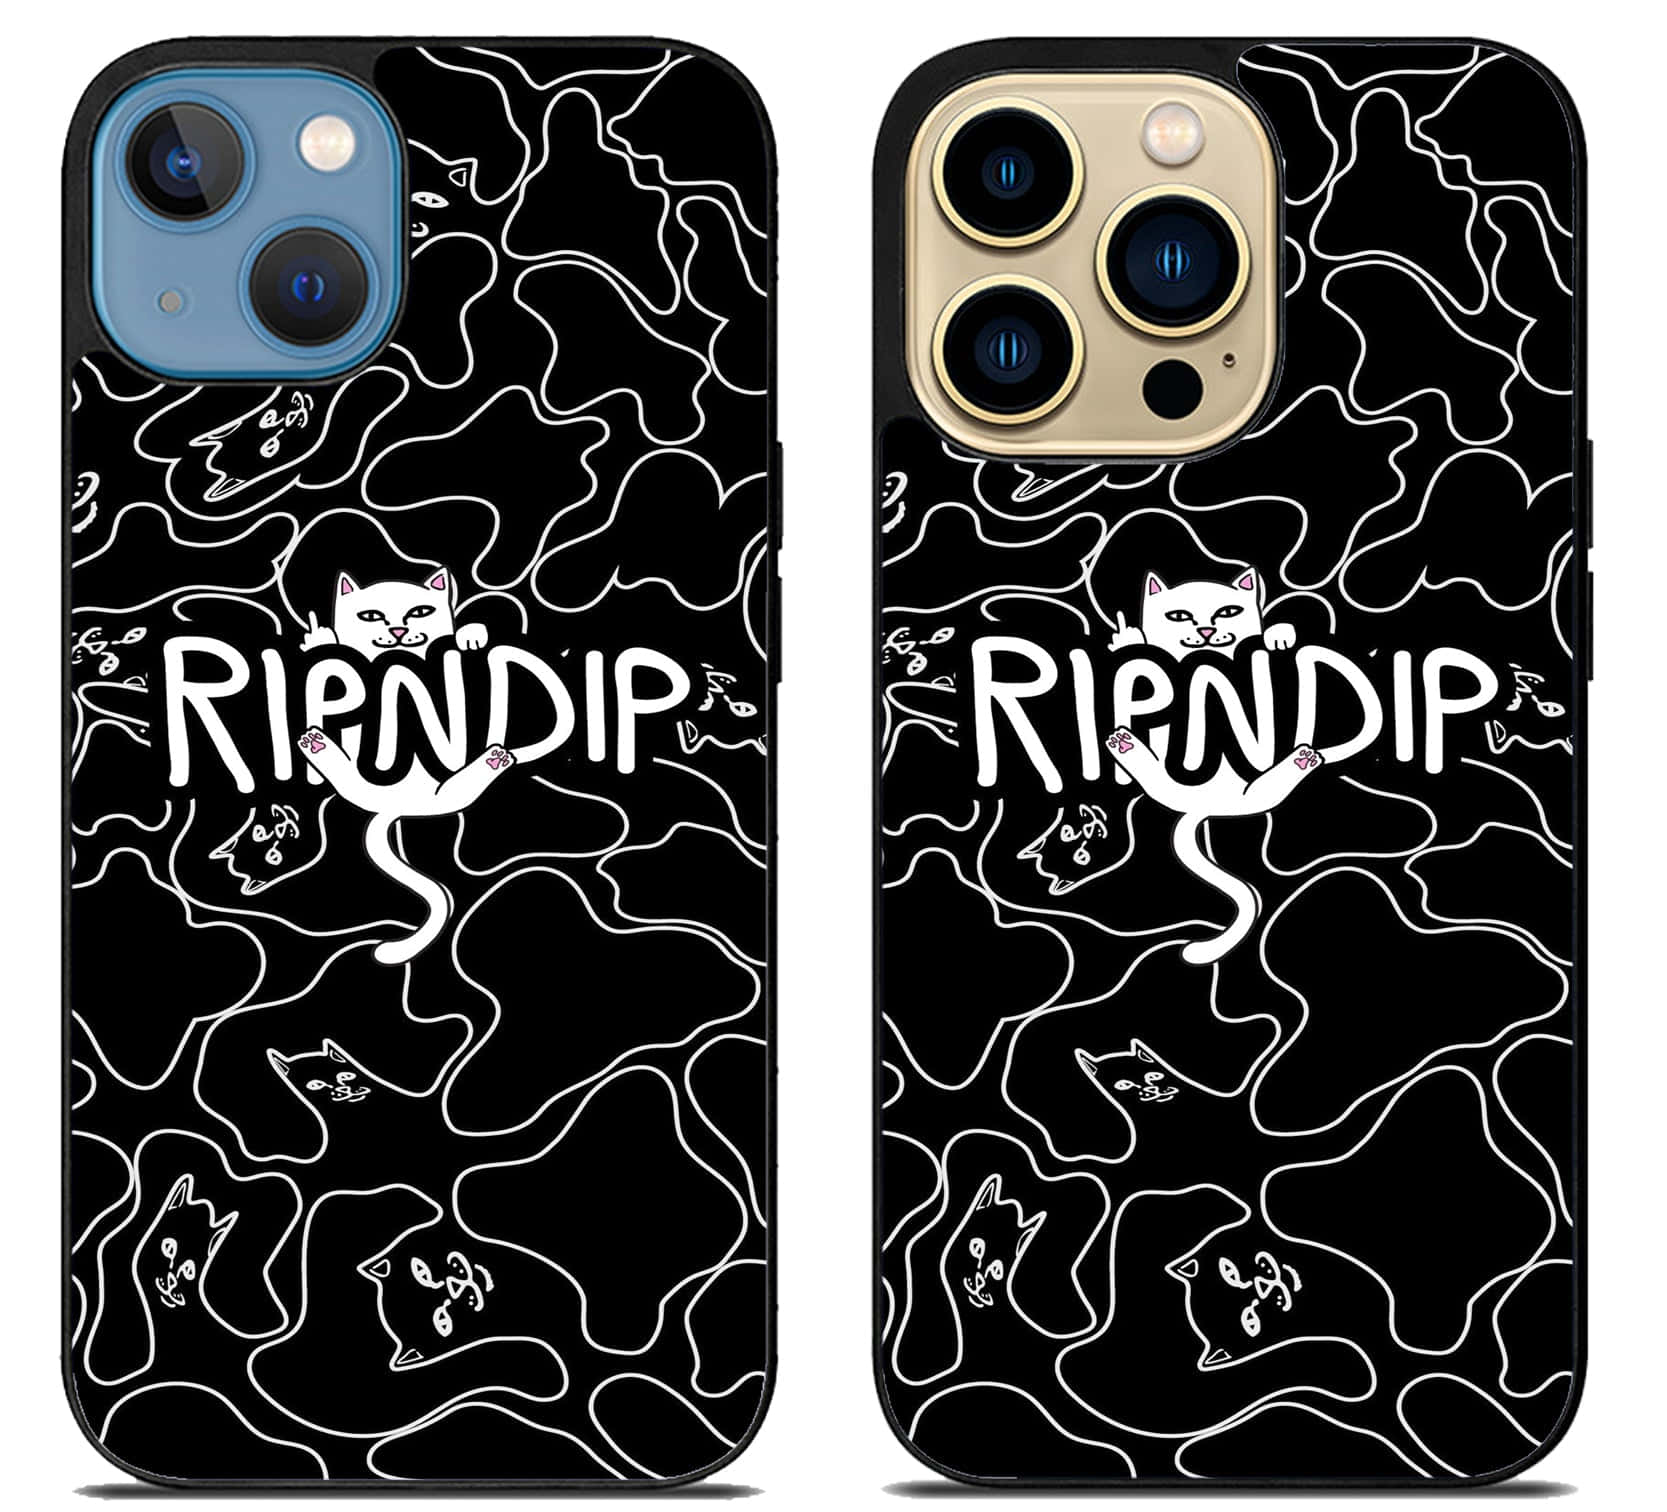 Standing Out From The Crowd With RipNDip Wallpaper